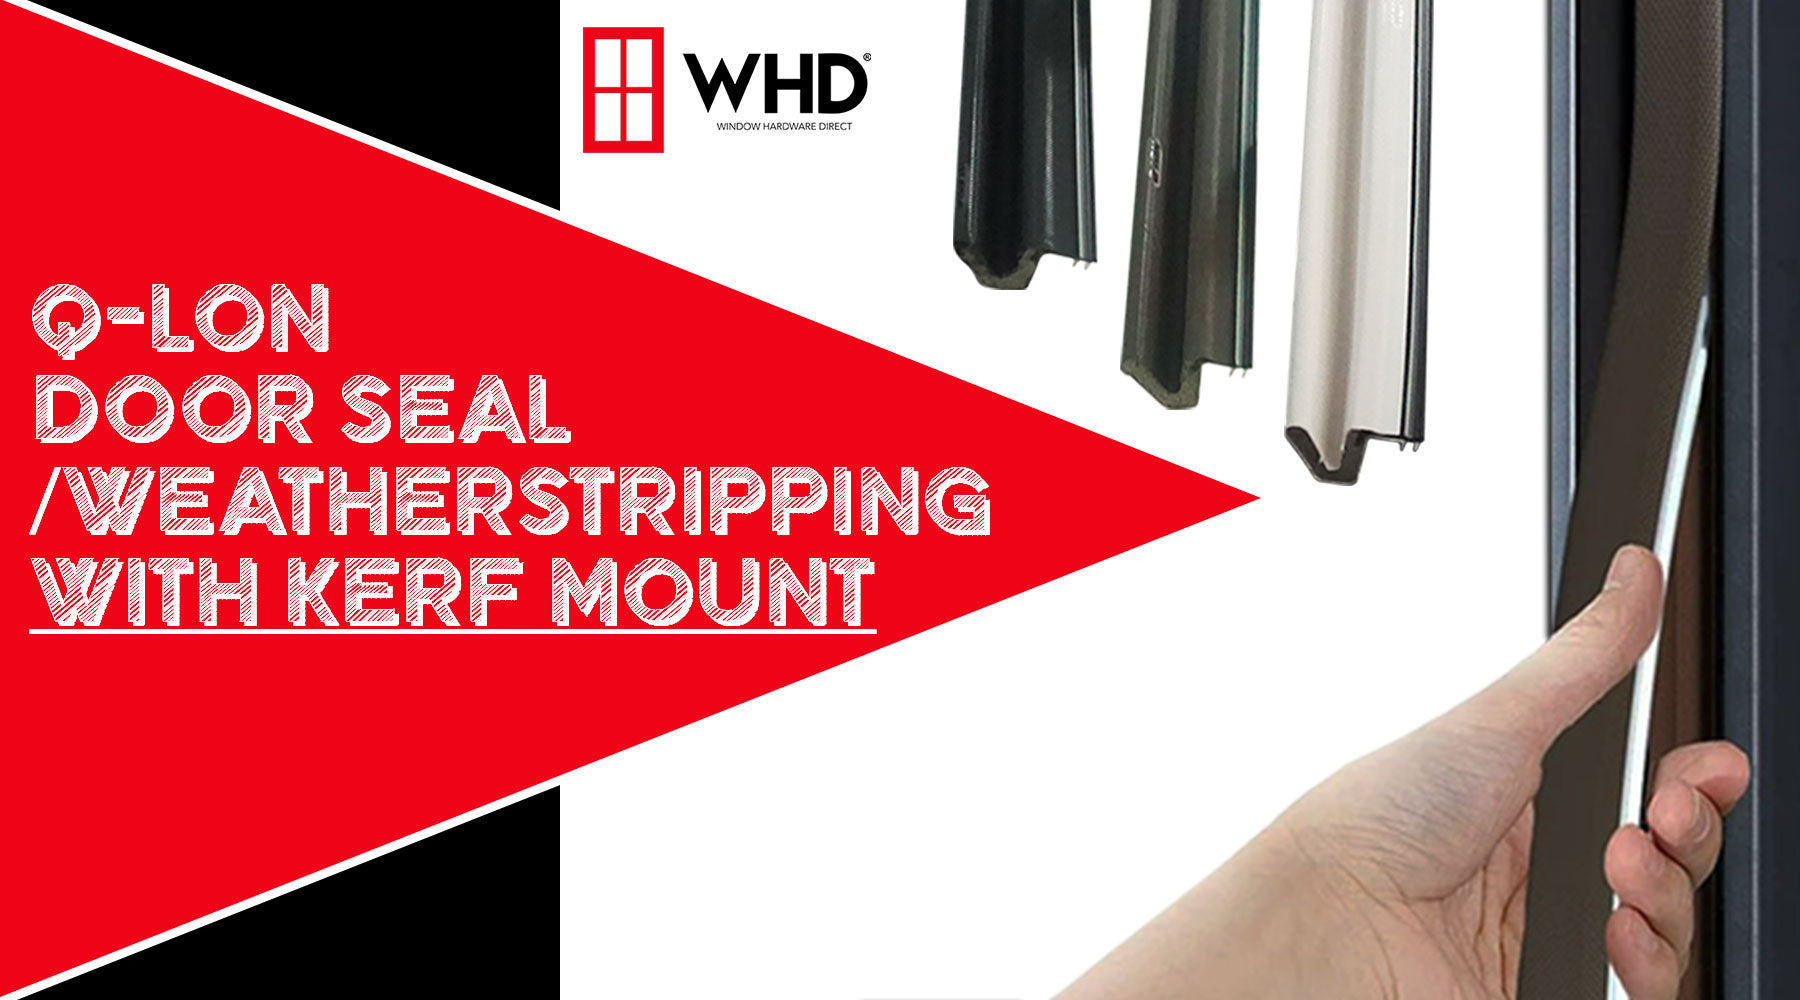 Q-Lon Door Seal/Weatherstripping with Kerf Mount: Everything You Need to Know